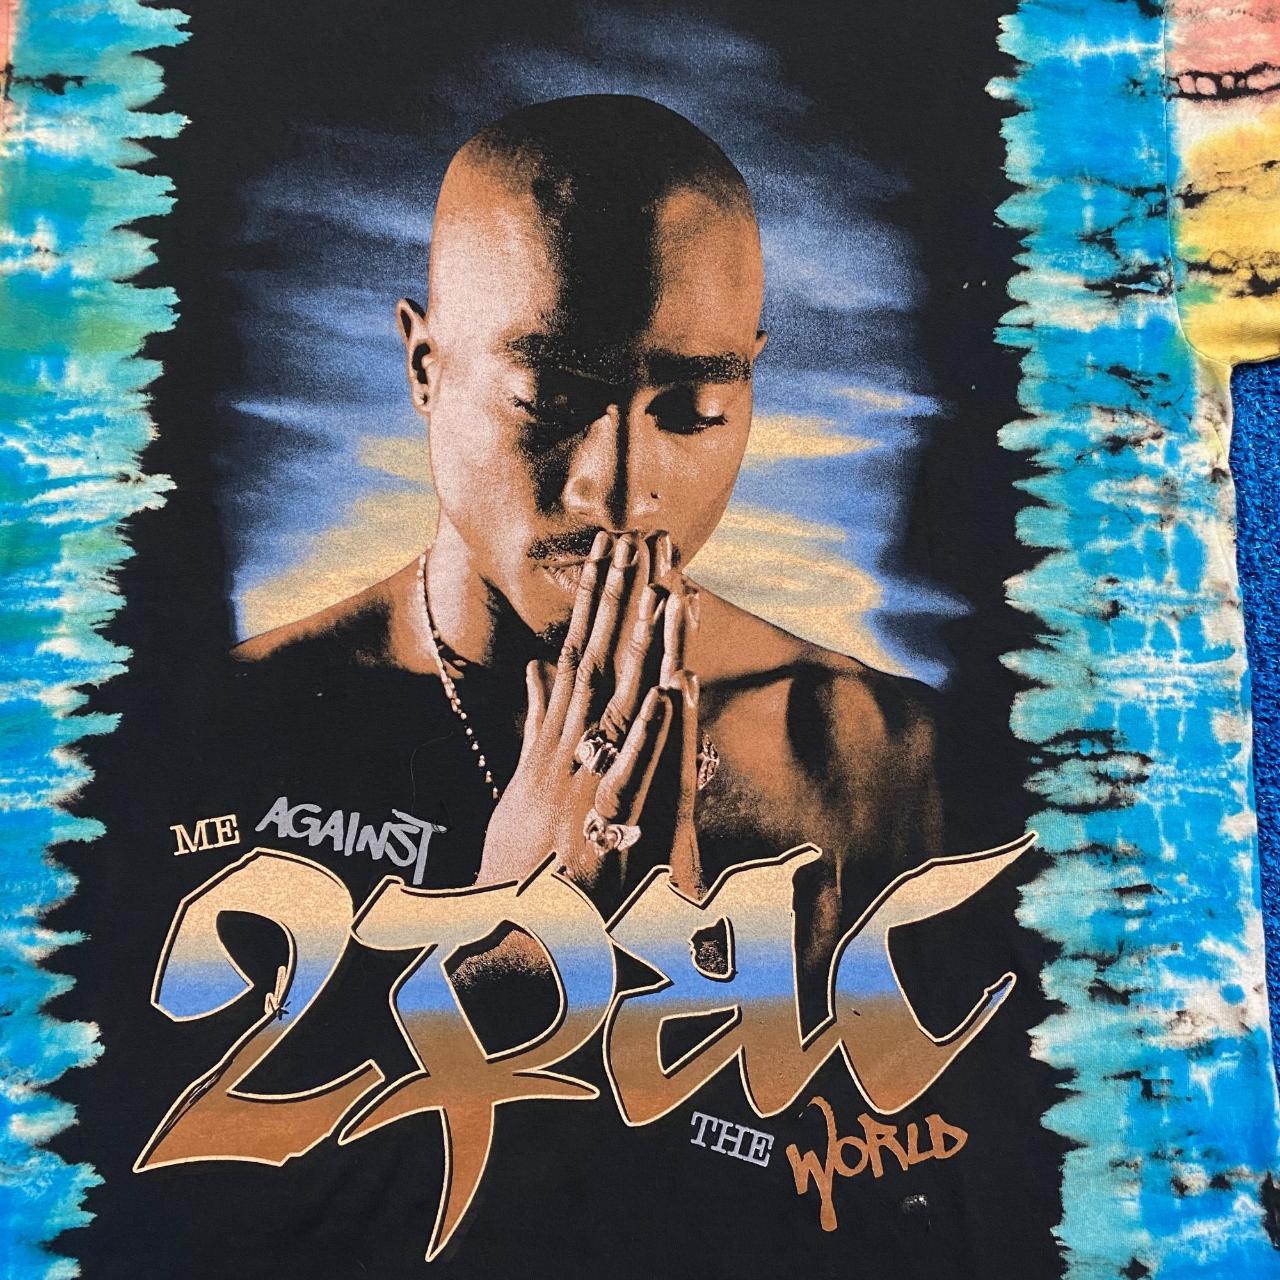 2pac me against the world poster